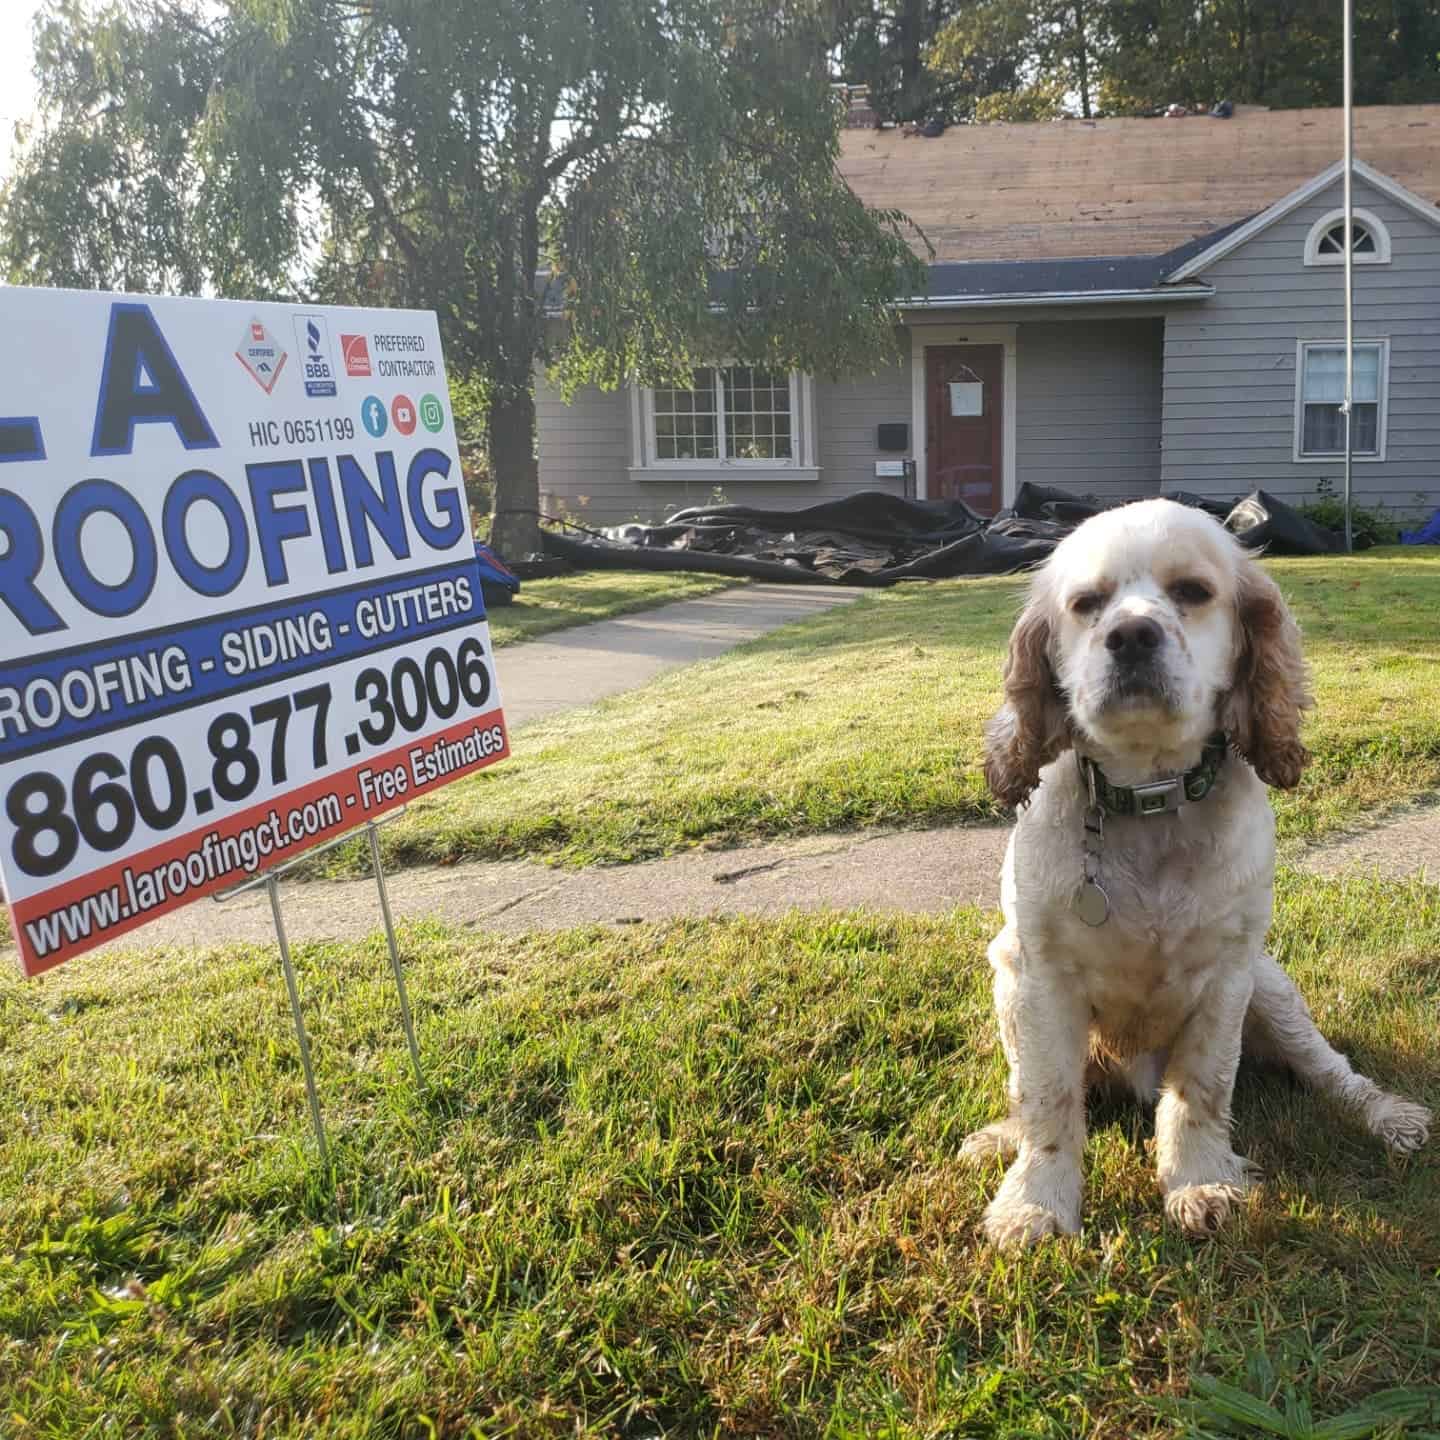 LA-Roofing-Roof-Siding-and-Gutters